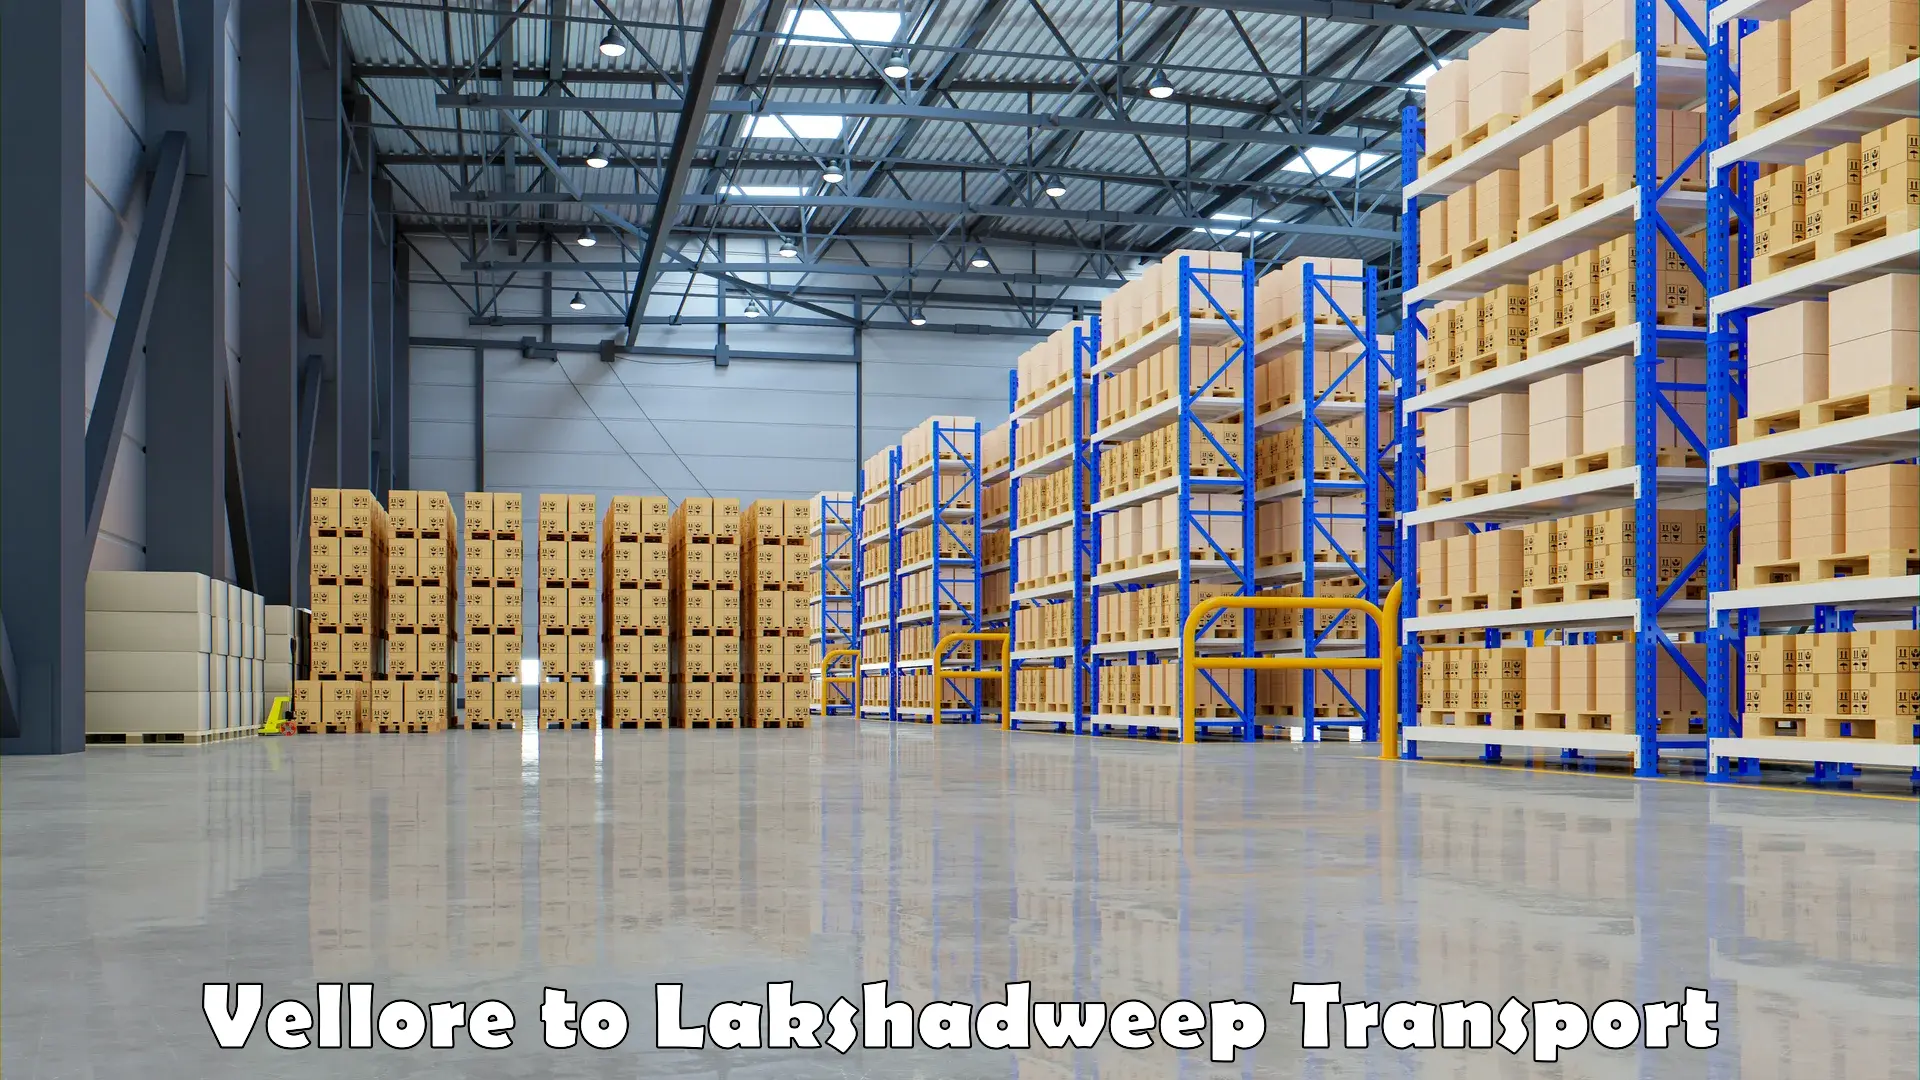 Commercial transport service Vellore to Lakshadweep